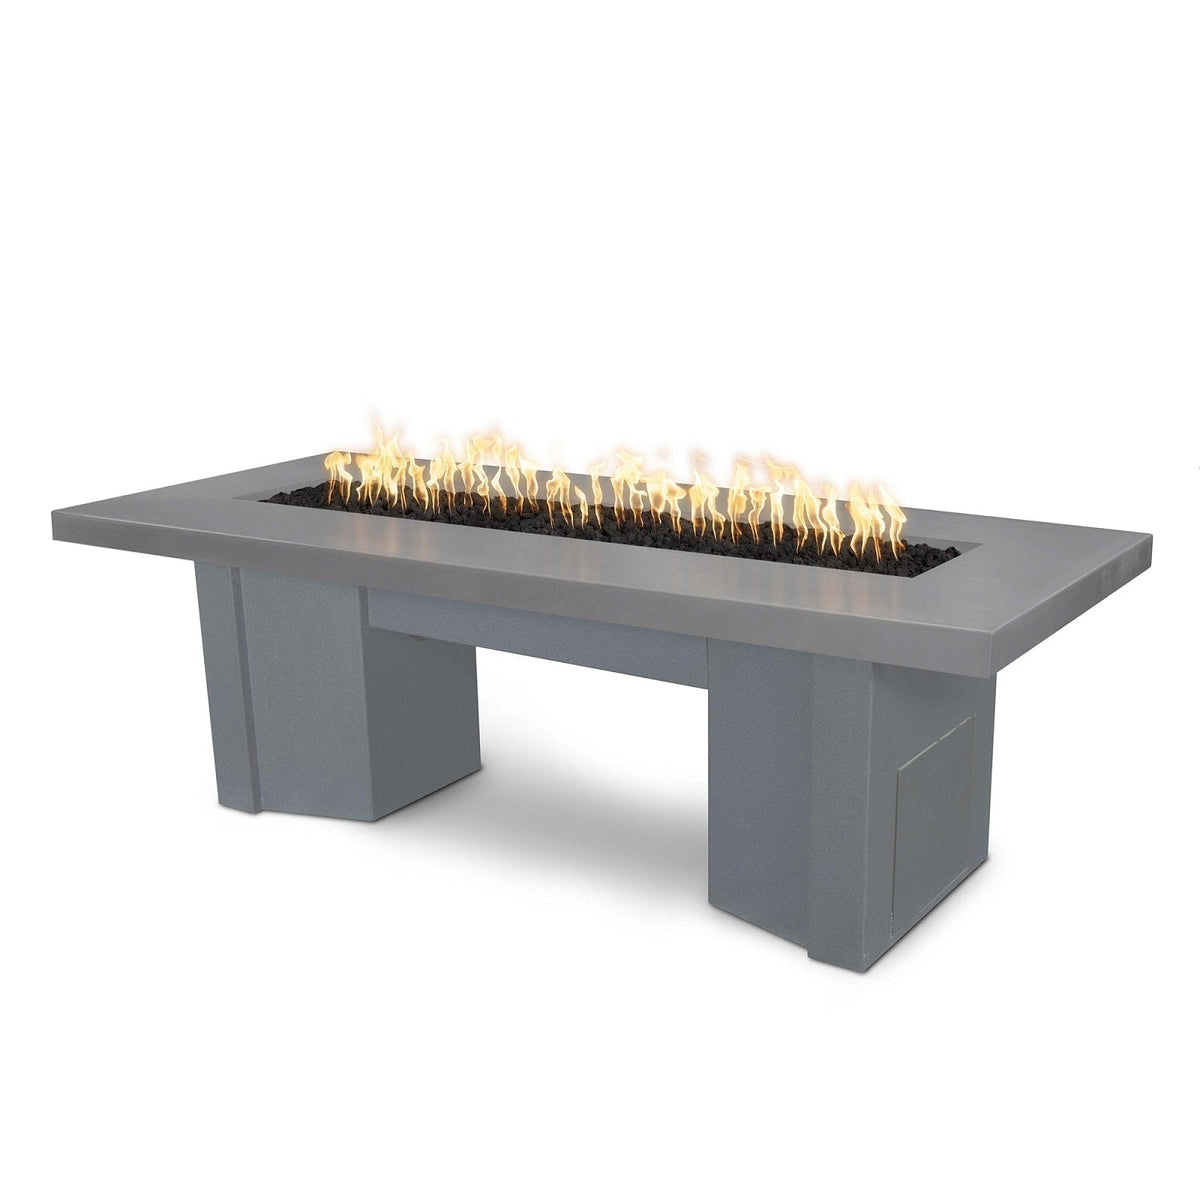 The Outdoor Plus Fire Features Natural Gray (-NGY) / Gray Powder Coated Steel (-GRY) The Outdoor Plus 78&quot; Alameda Fire Table Smooth Concrete in Natural Gas - Flame Sense System with Push Button Spark Igniter / OPT-ALMGFRC78FSEN-NG